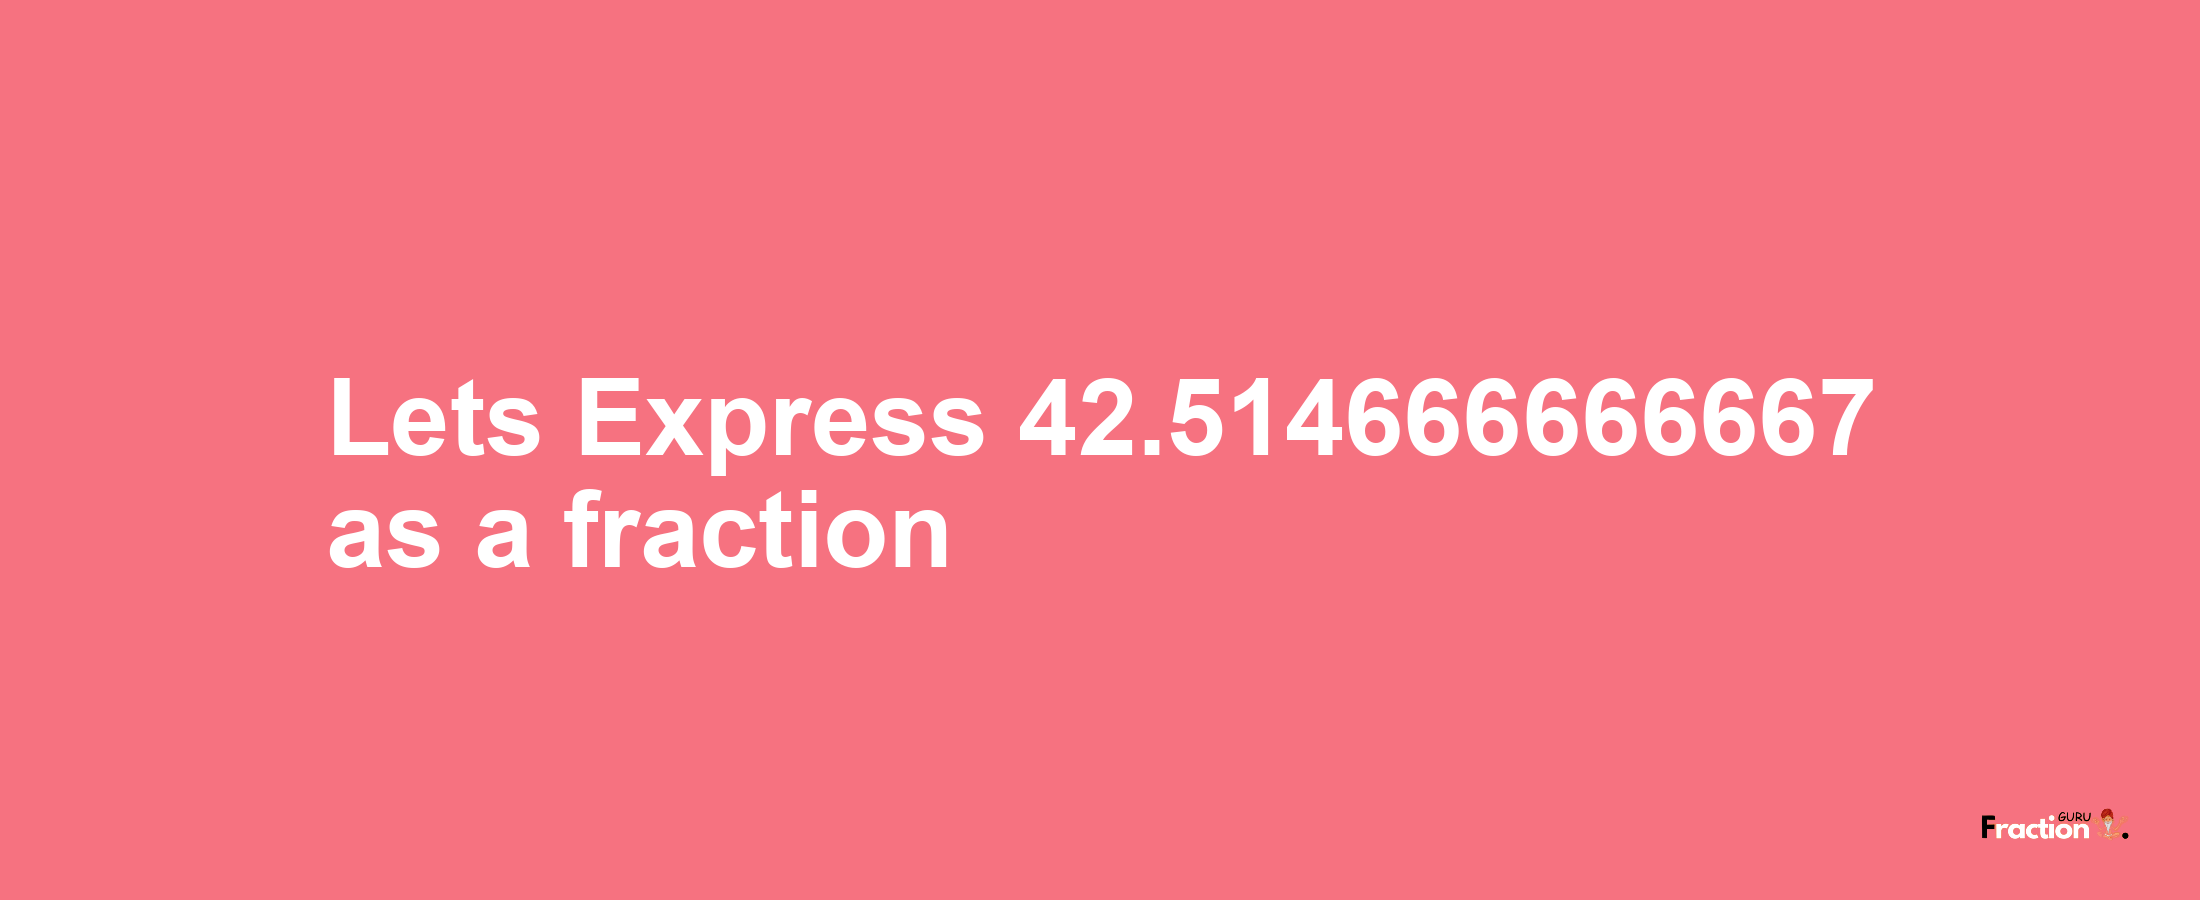 Lets Express 42.514666666667 as afraction